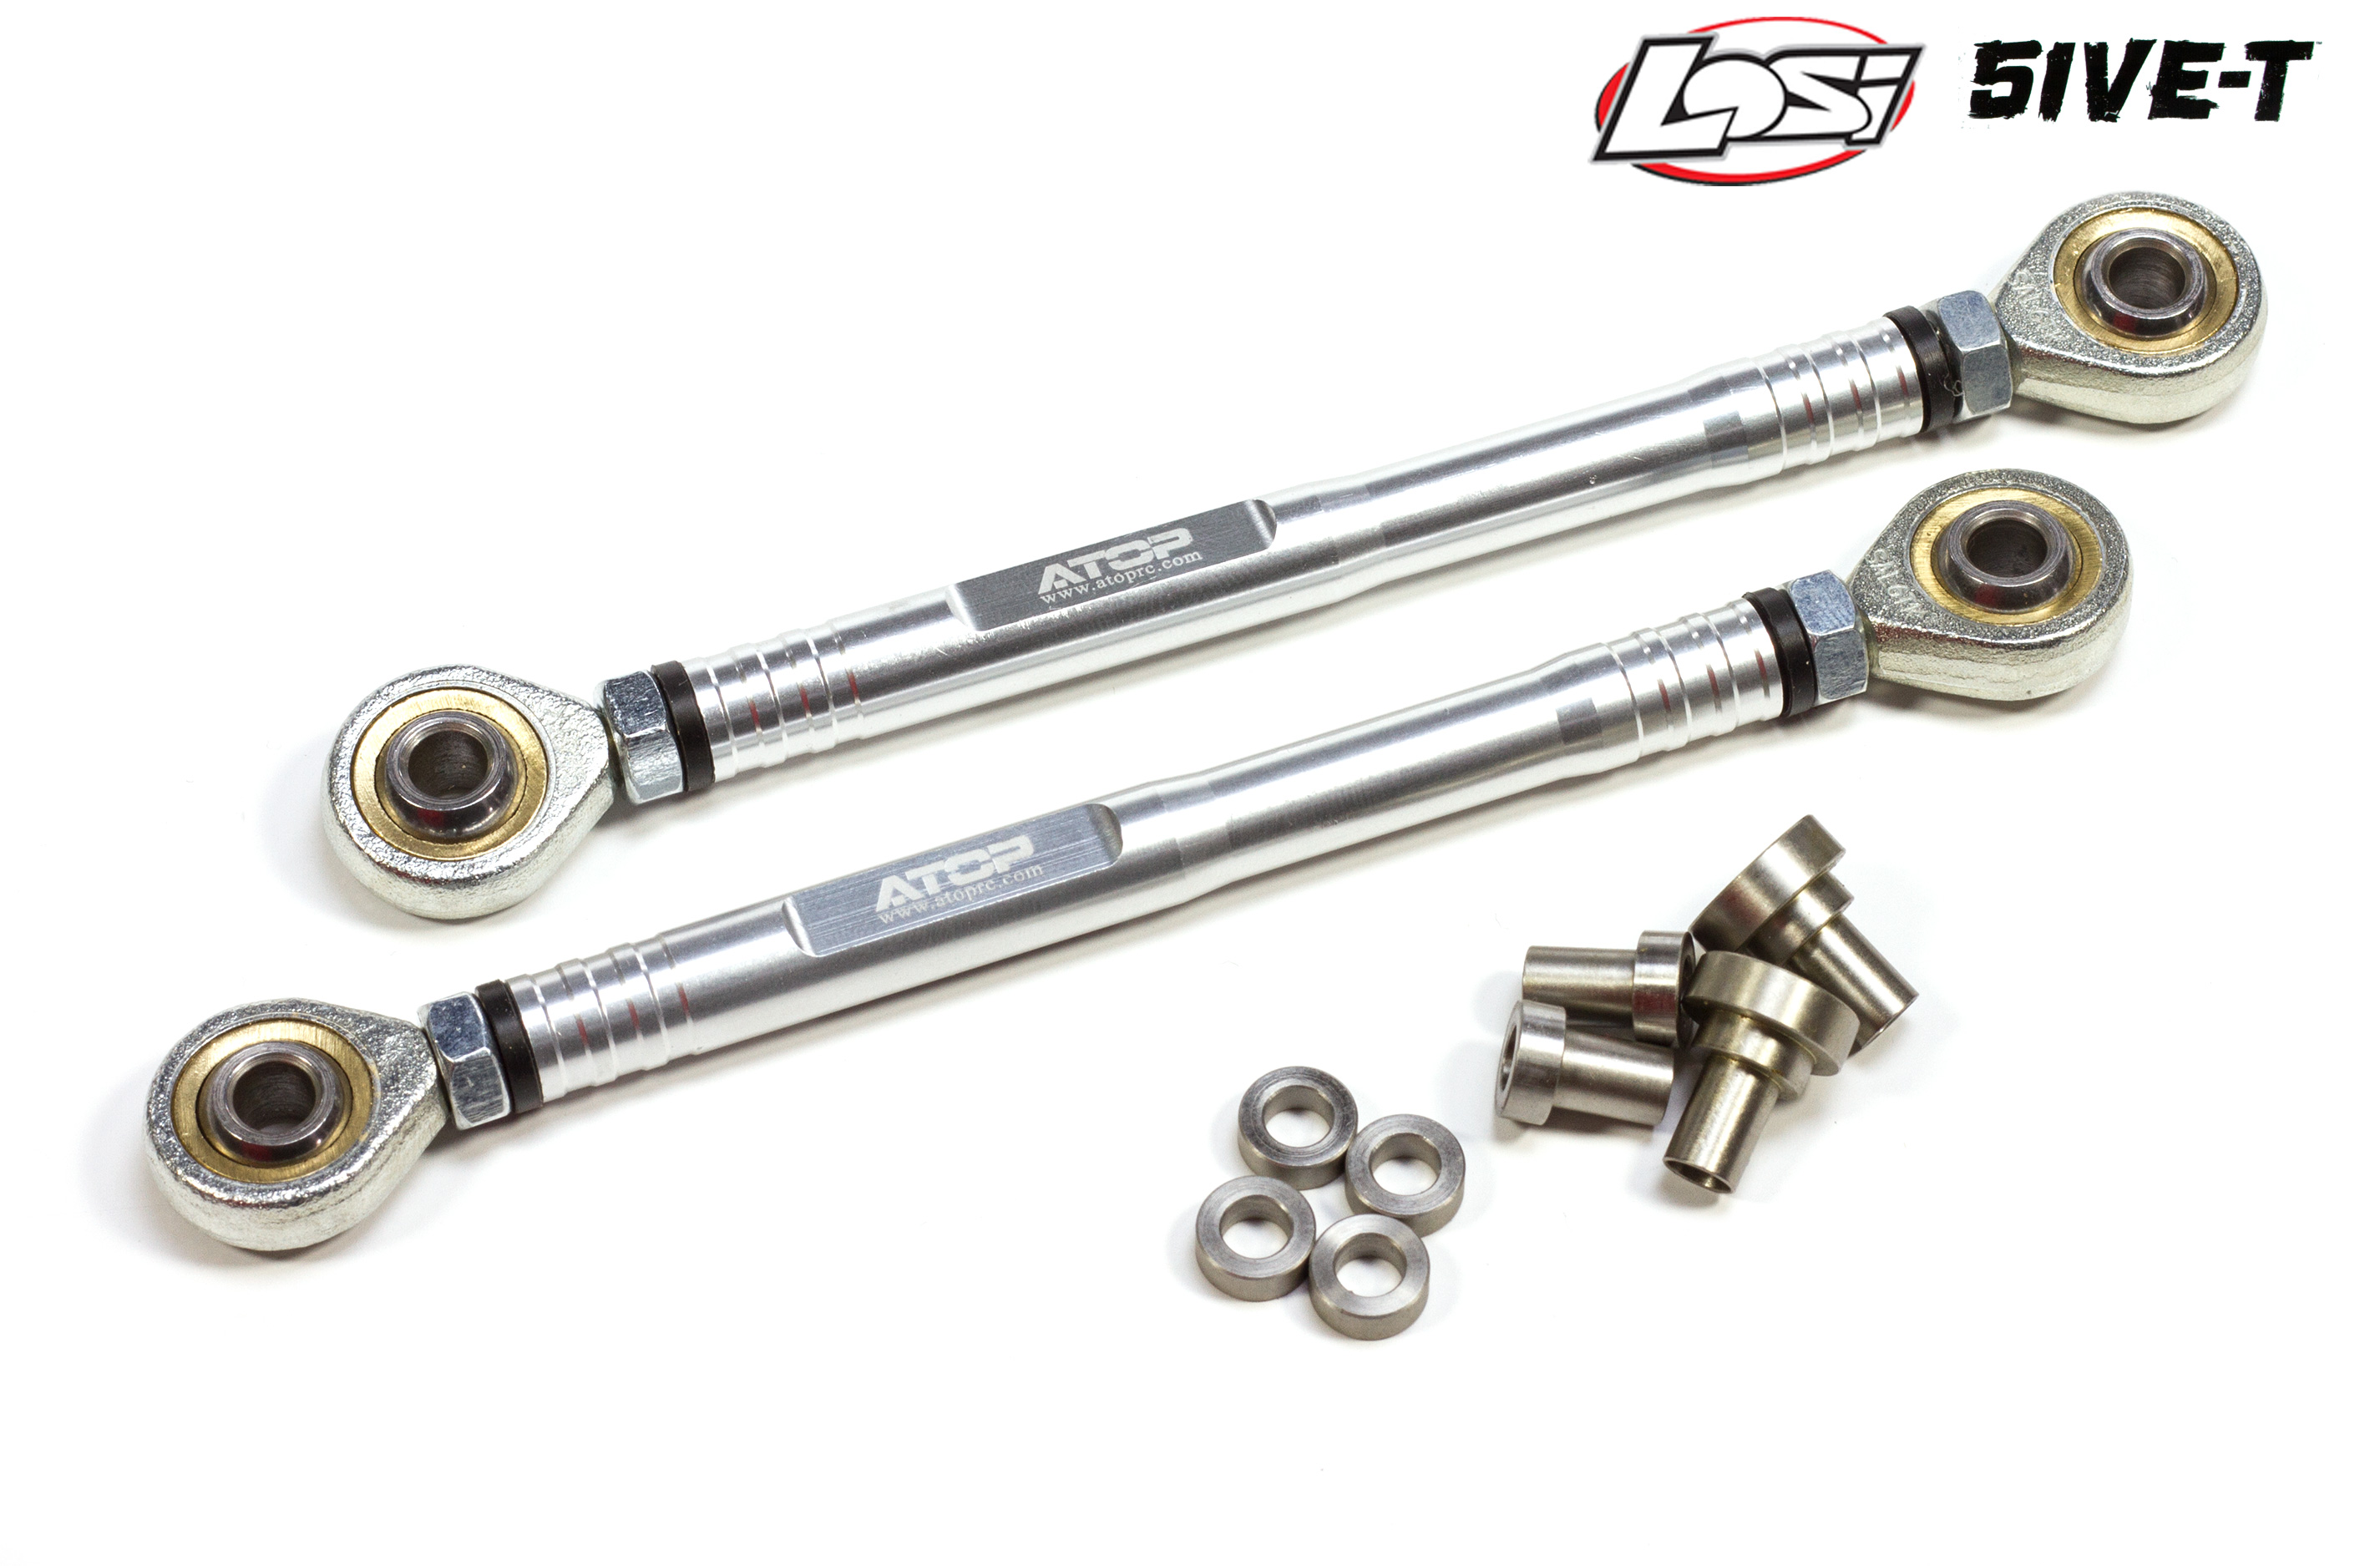 AT-5T013 ATOP Rear camber rods 5ive-T/2.0